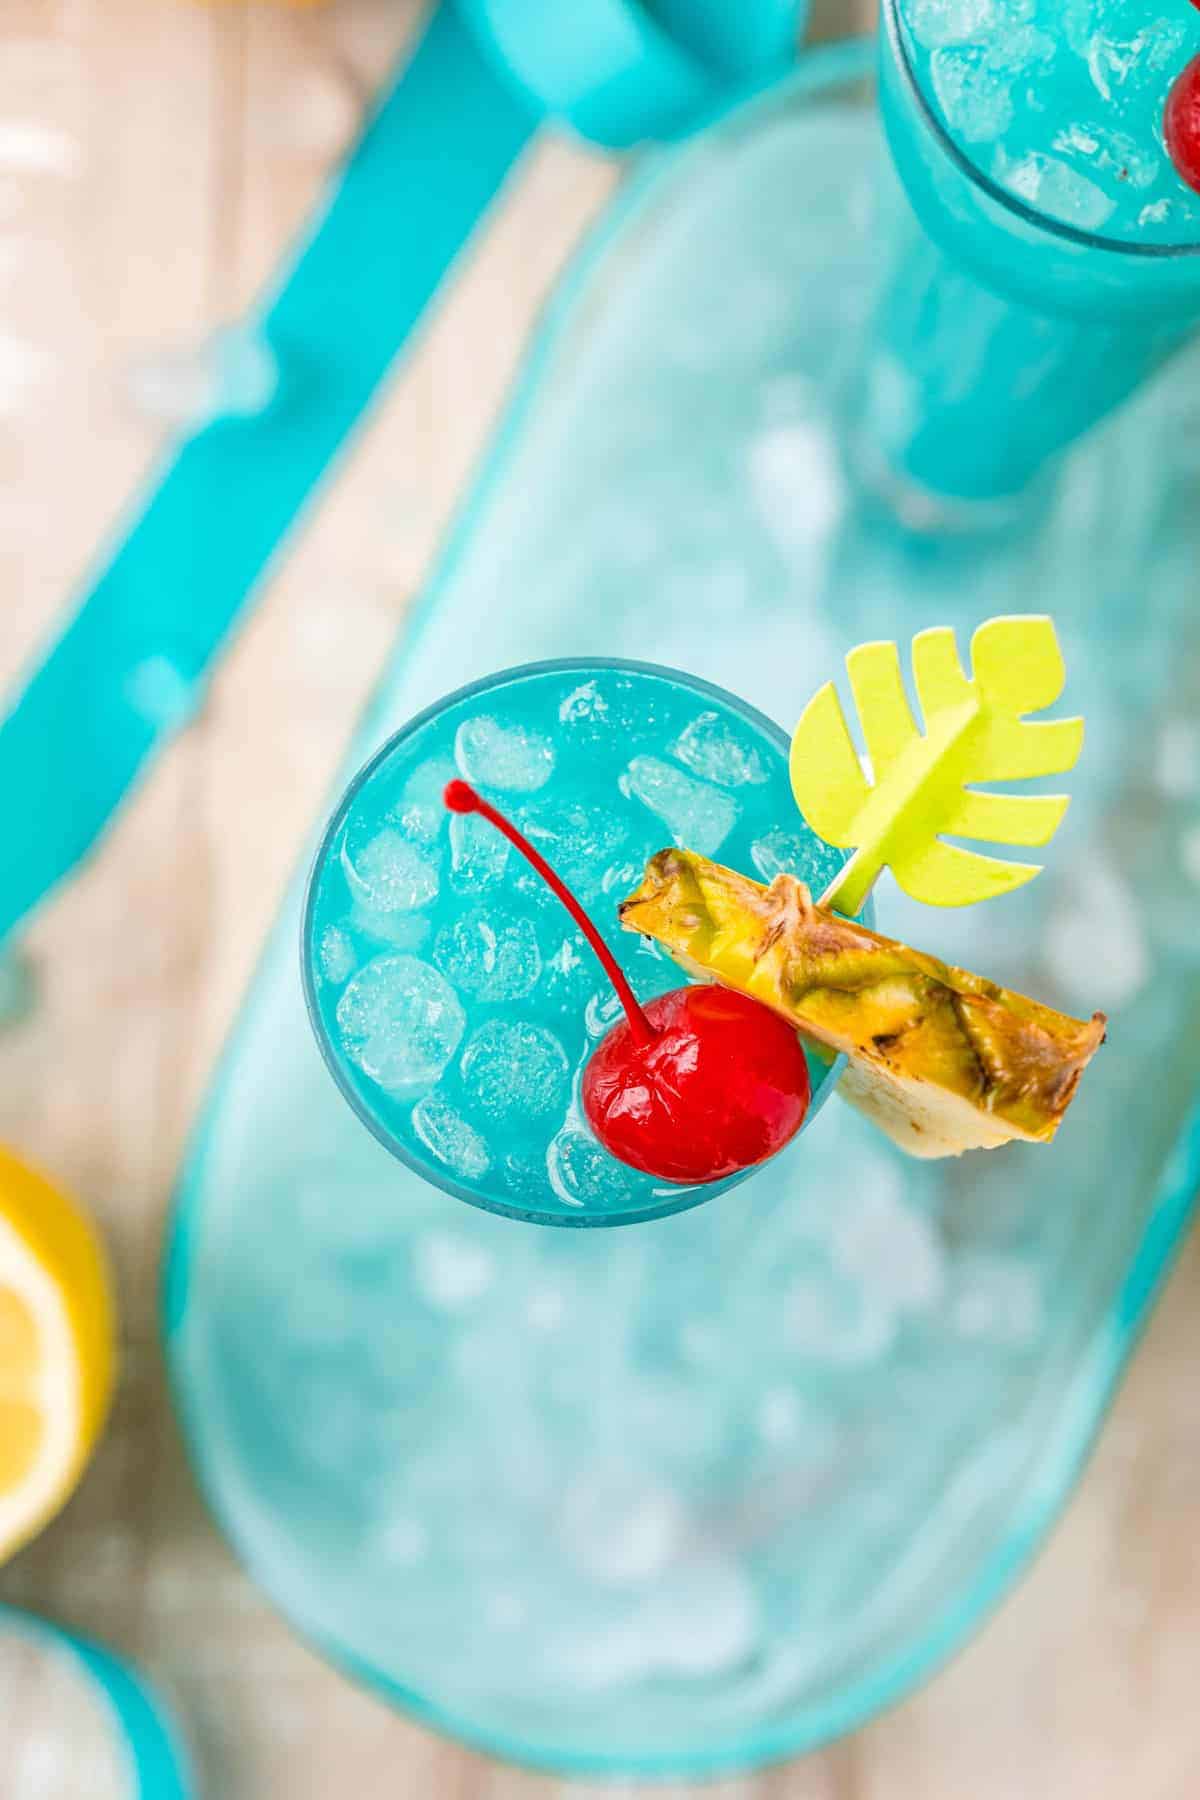 Overhead view of bright blue drink with a pineapple wedge and a cherry.